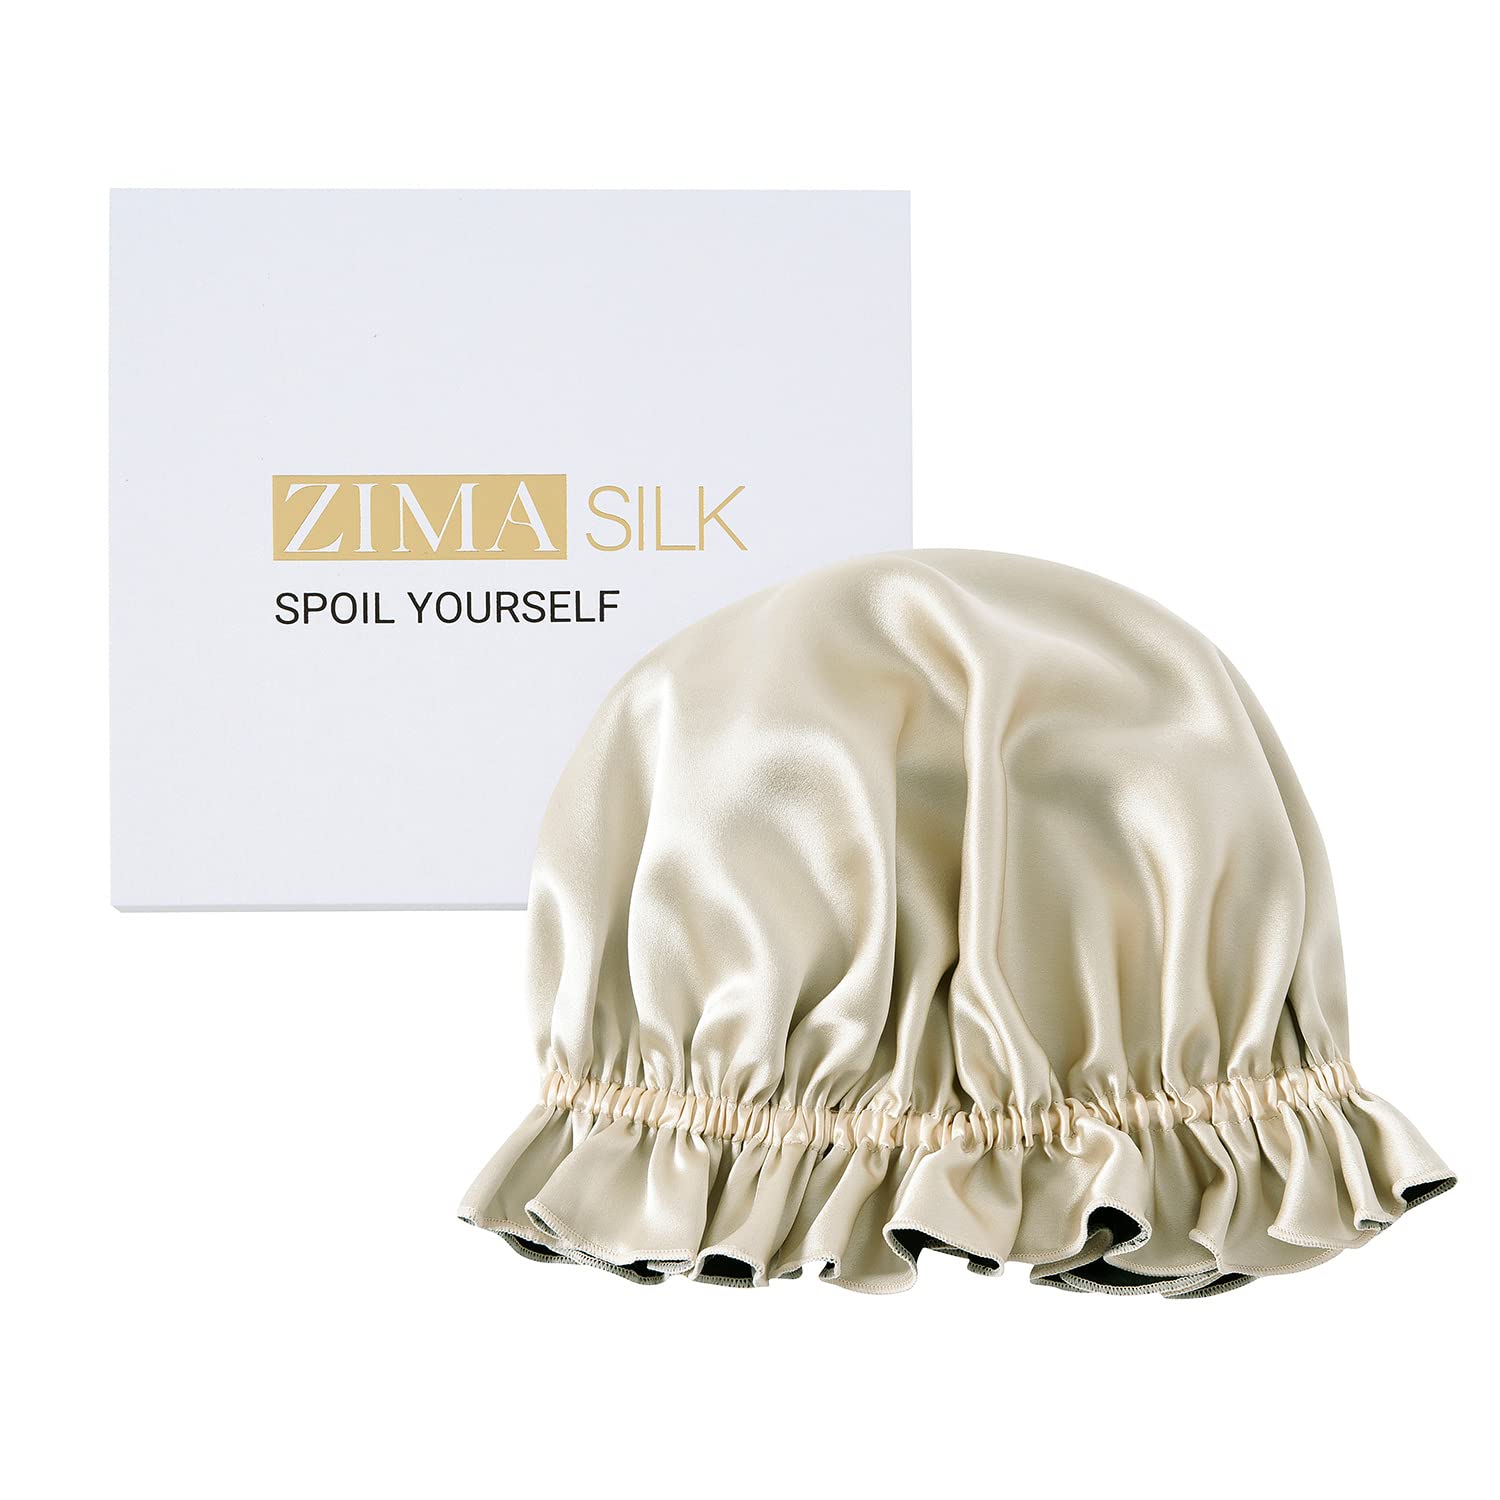 ZIMASILK 100% Mulberry Silk Bonnet for Women Hair Care, Double Layered, Silk Hair Wrap for sleeping with Elastic Stay On Head (1Pc, Taupe+Black)